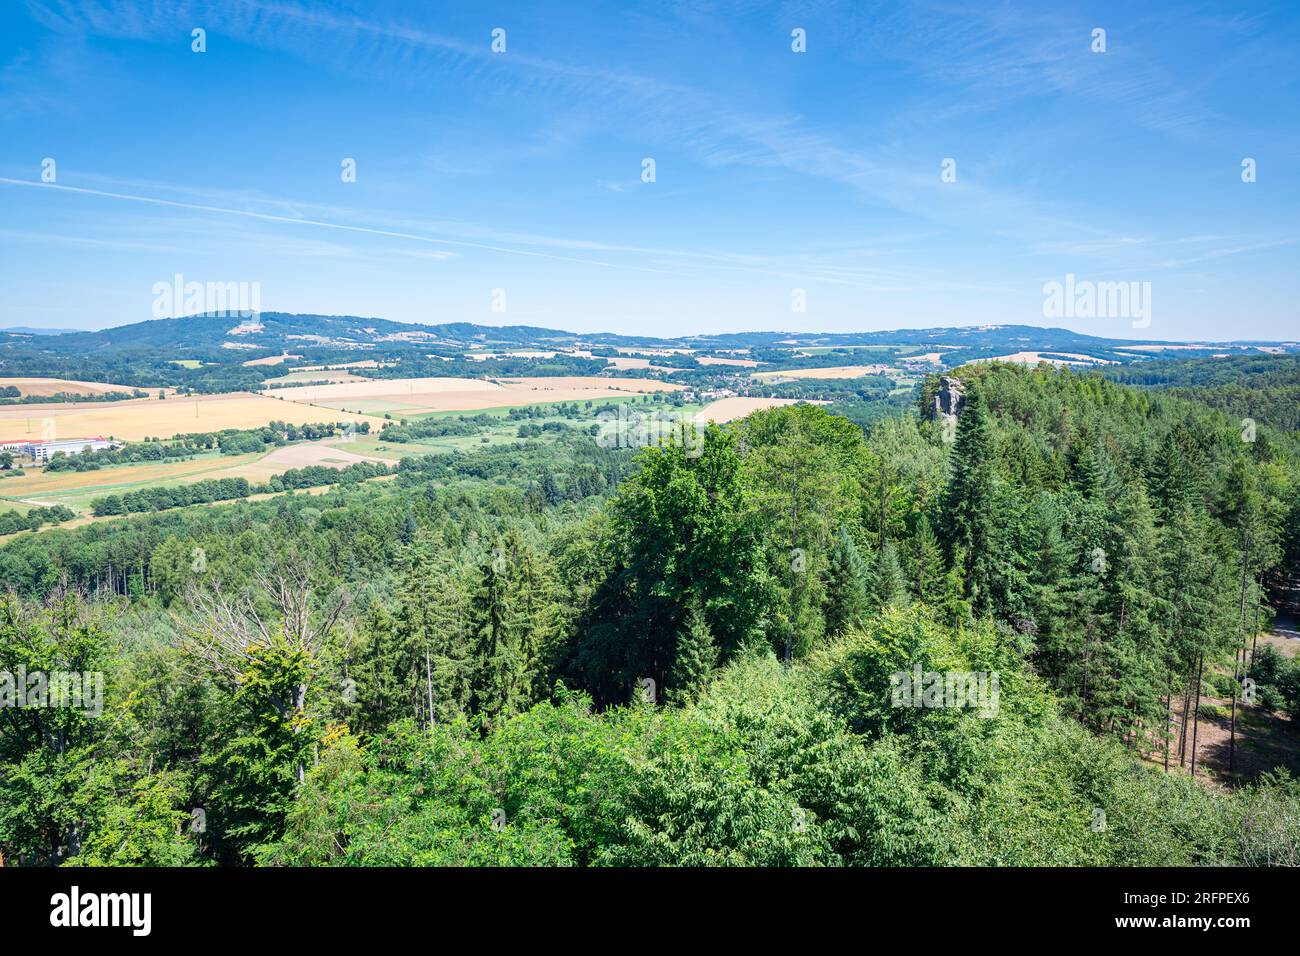 Classic view of the hilly and partly forested landscape of Bohemia in Czech Republic, central Europe. Stock Photo